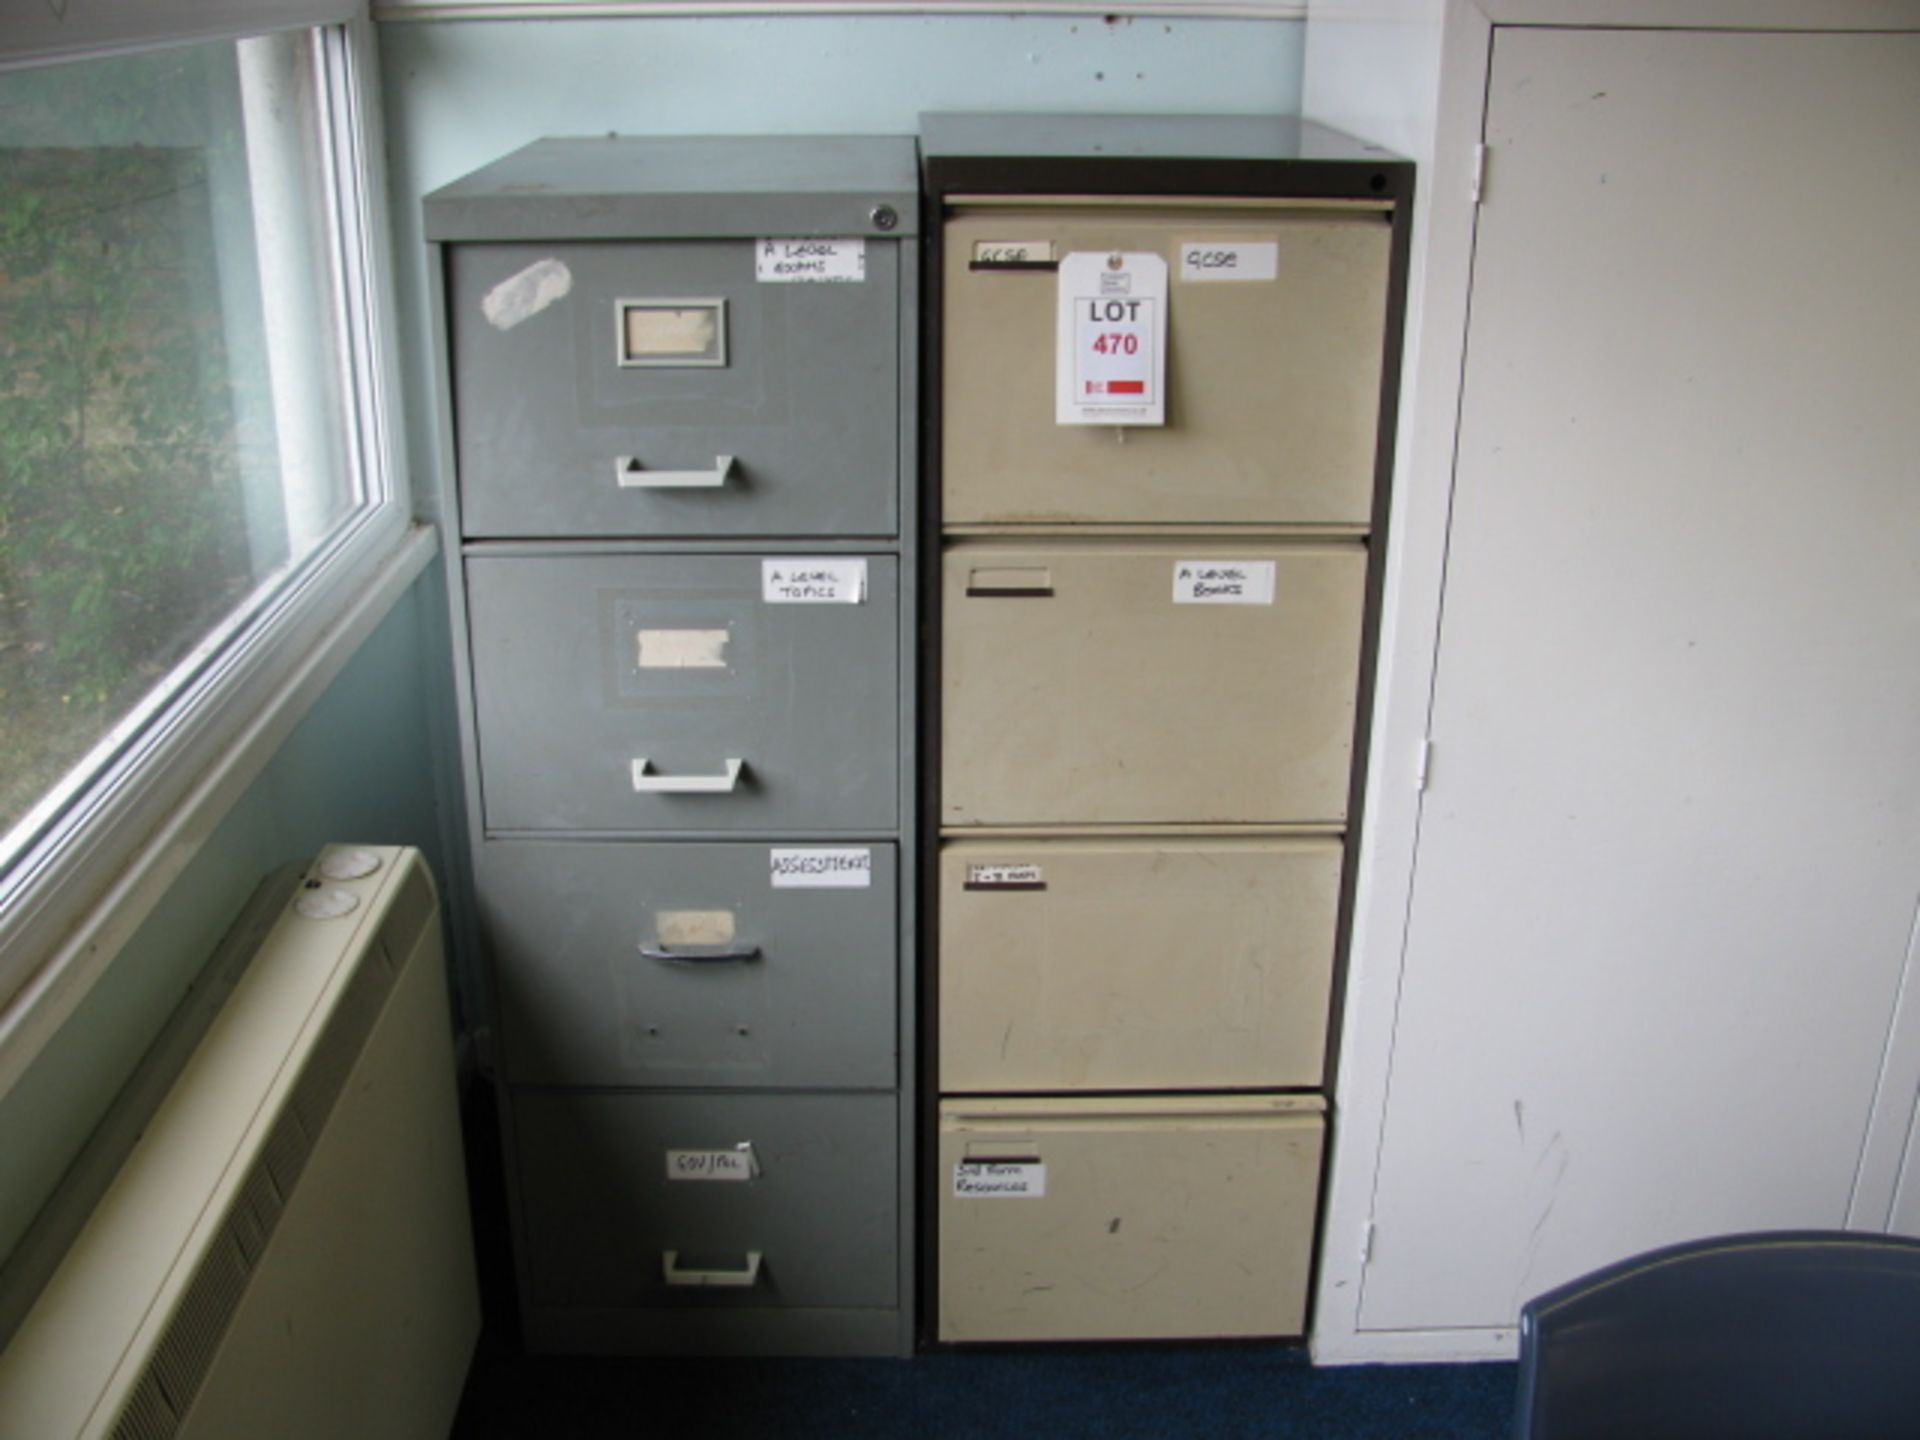 Two steel 4 drawer filing cabinets